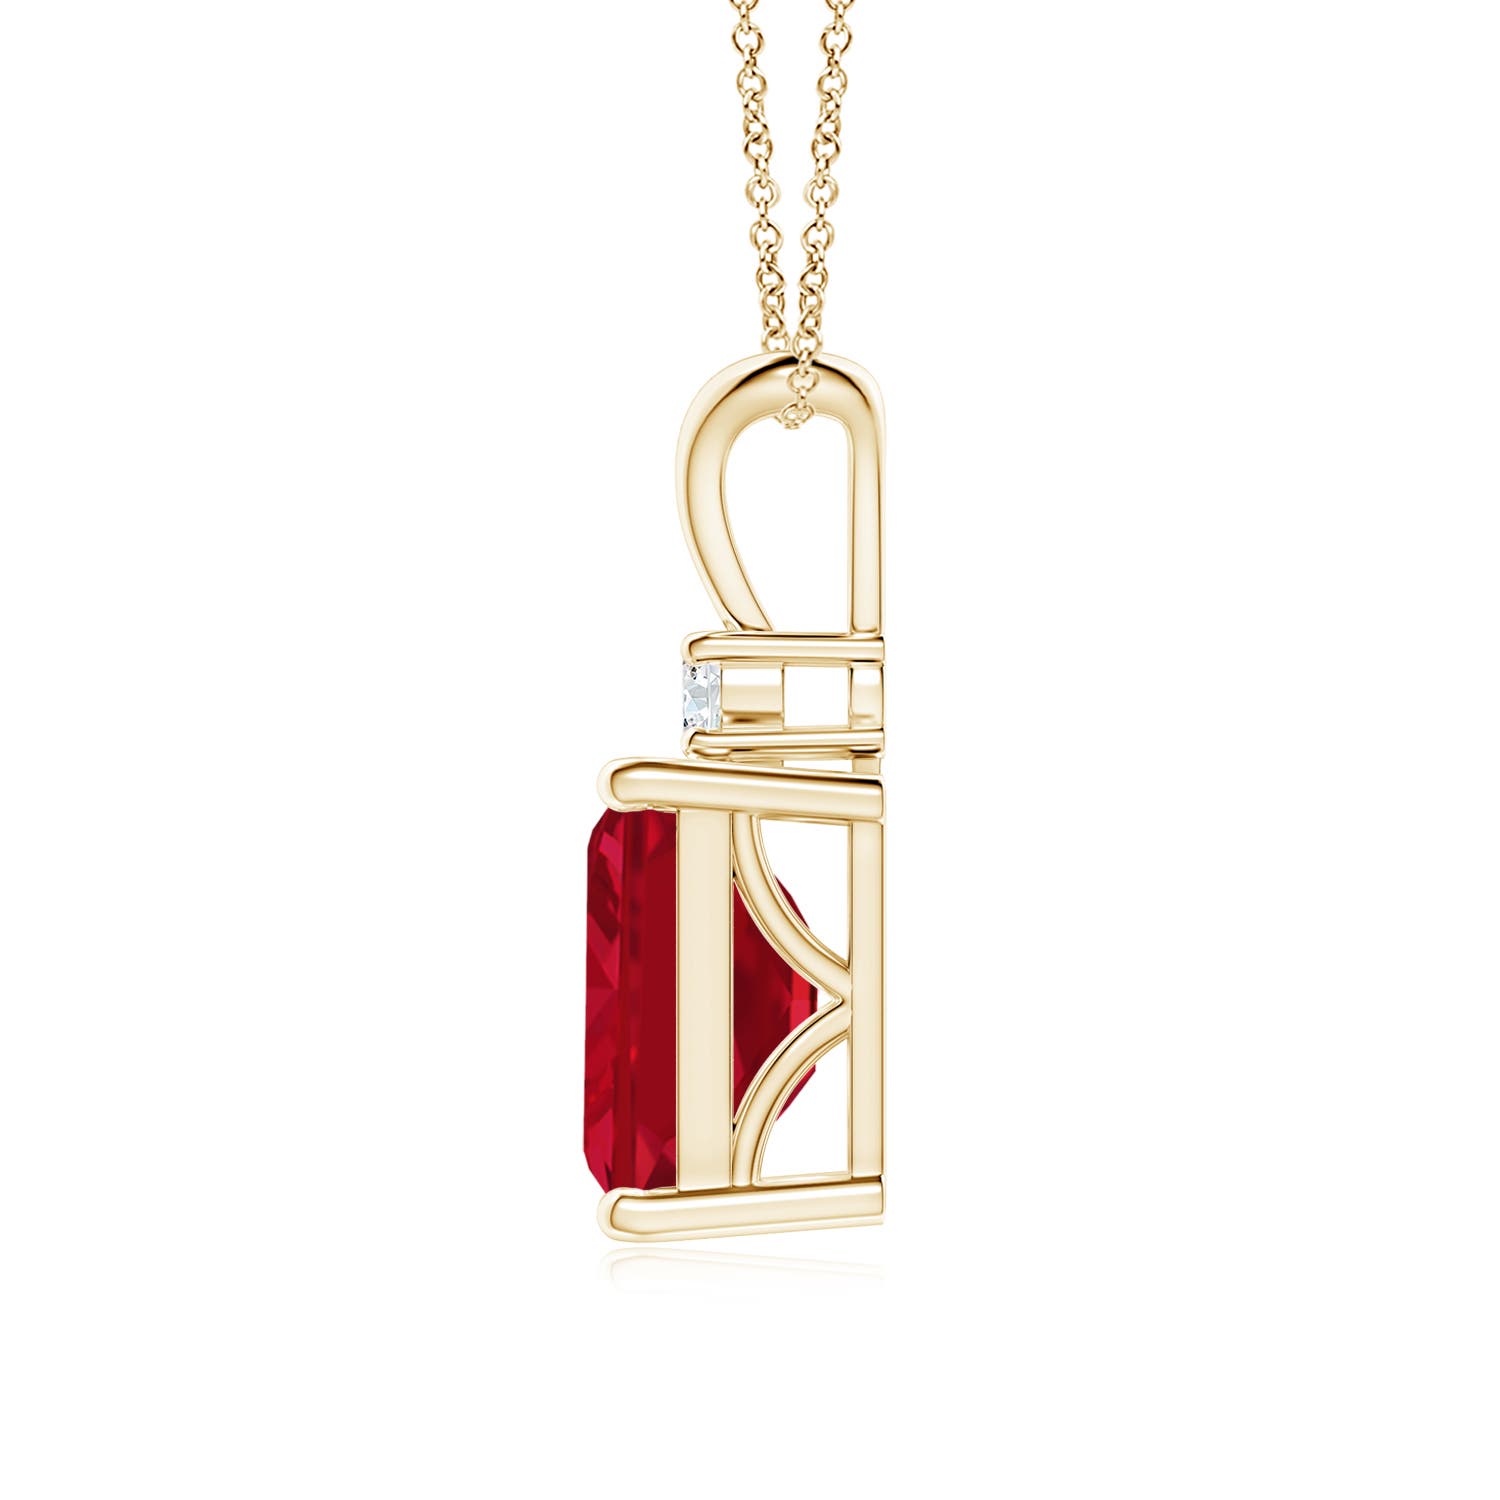 AAA - Ruby / 3.07 CT / 14 KT Yellow Gold